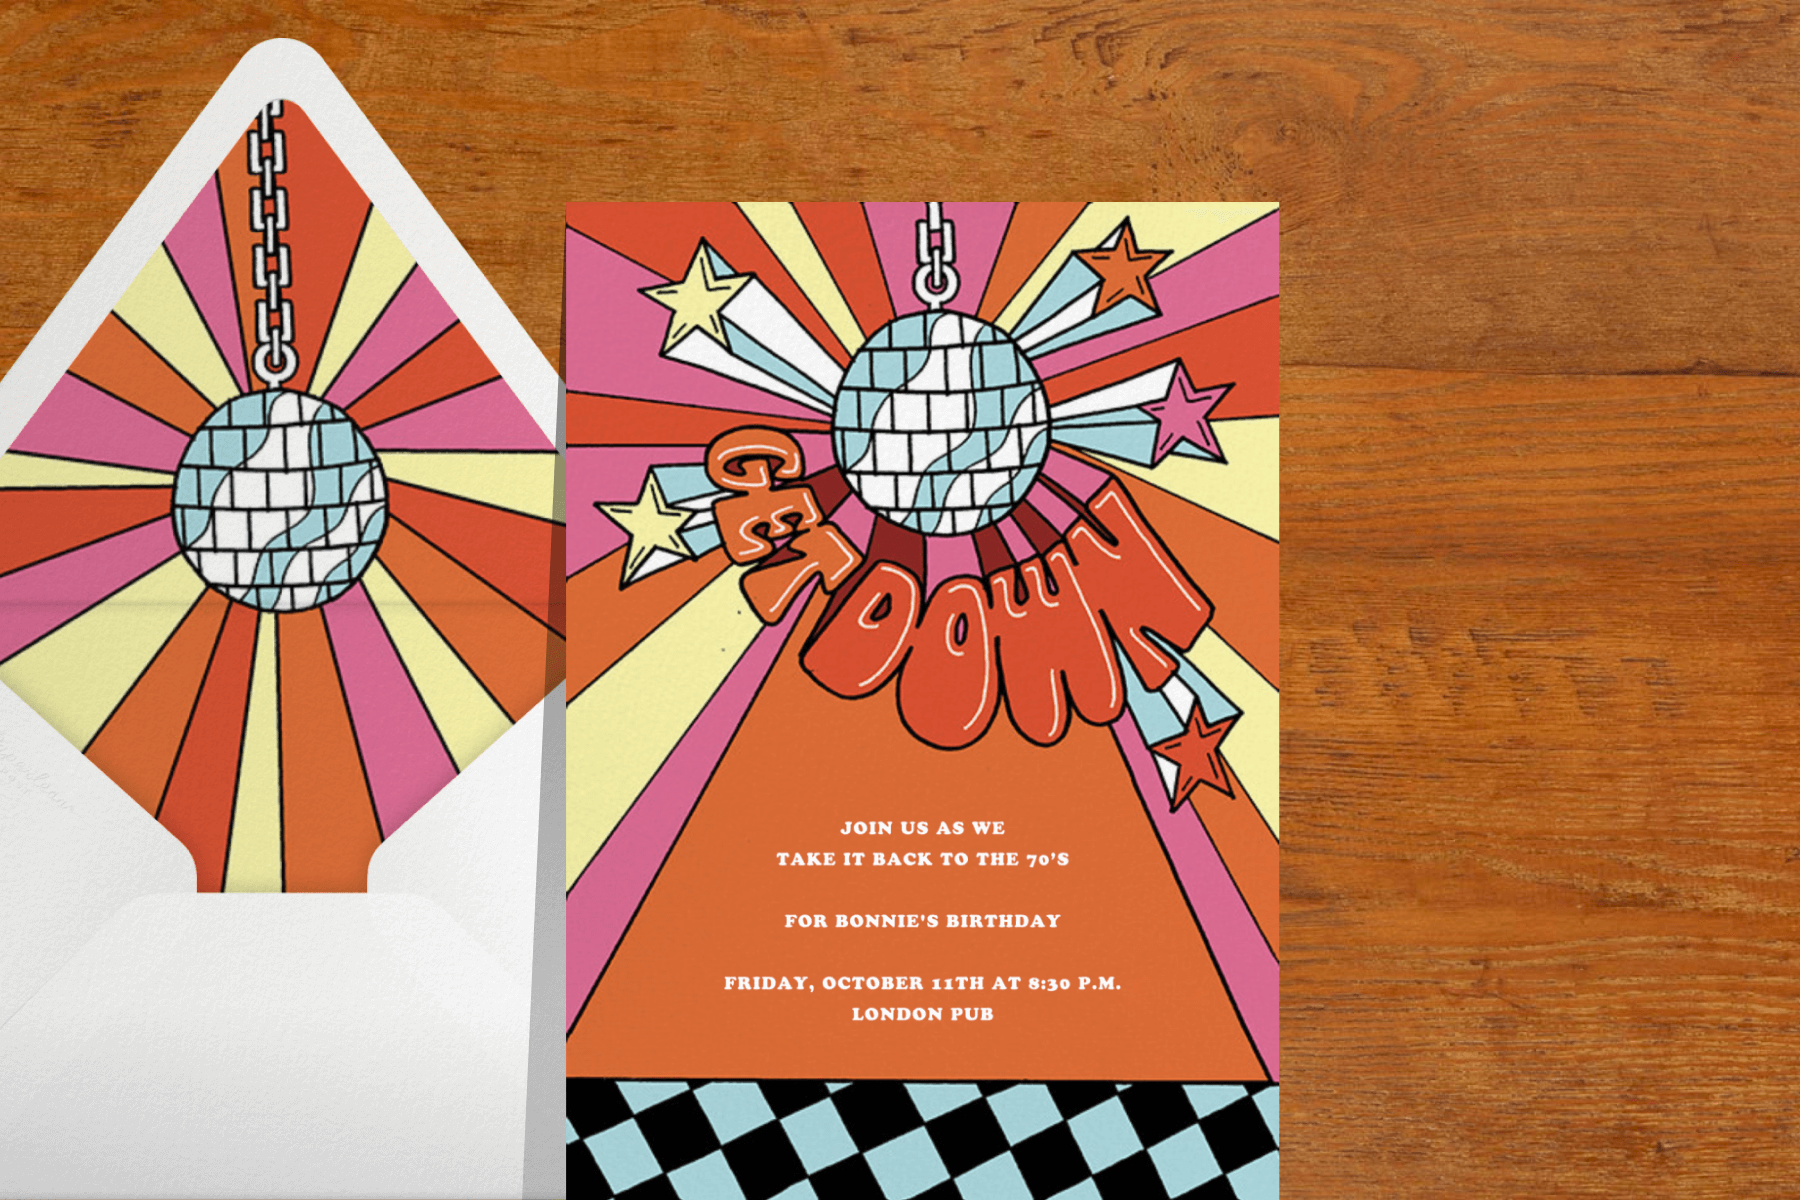 A party invitation with colorful pop art artwork and a disco ball.